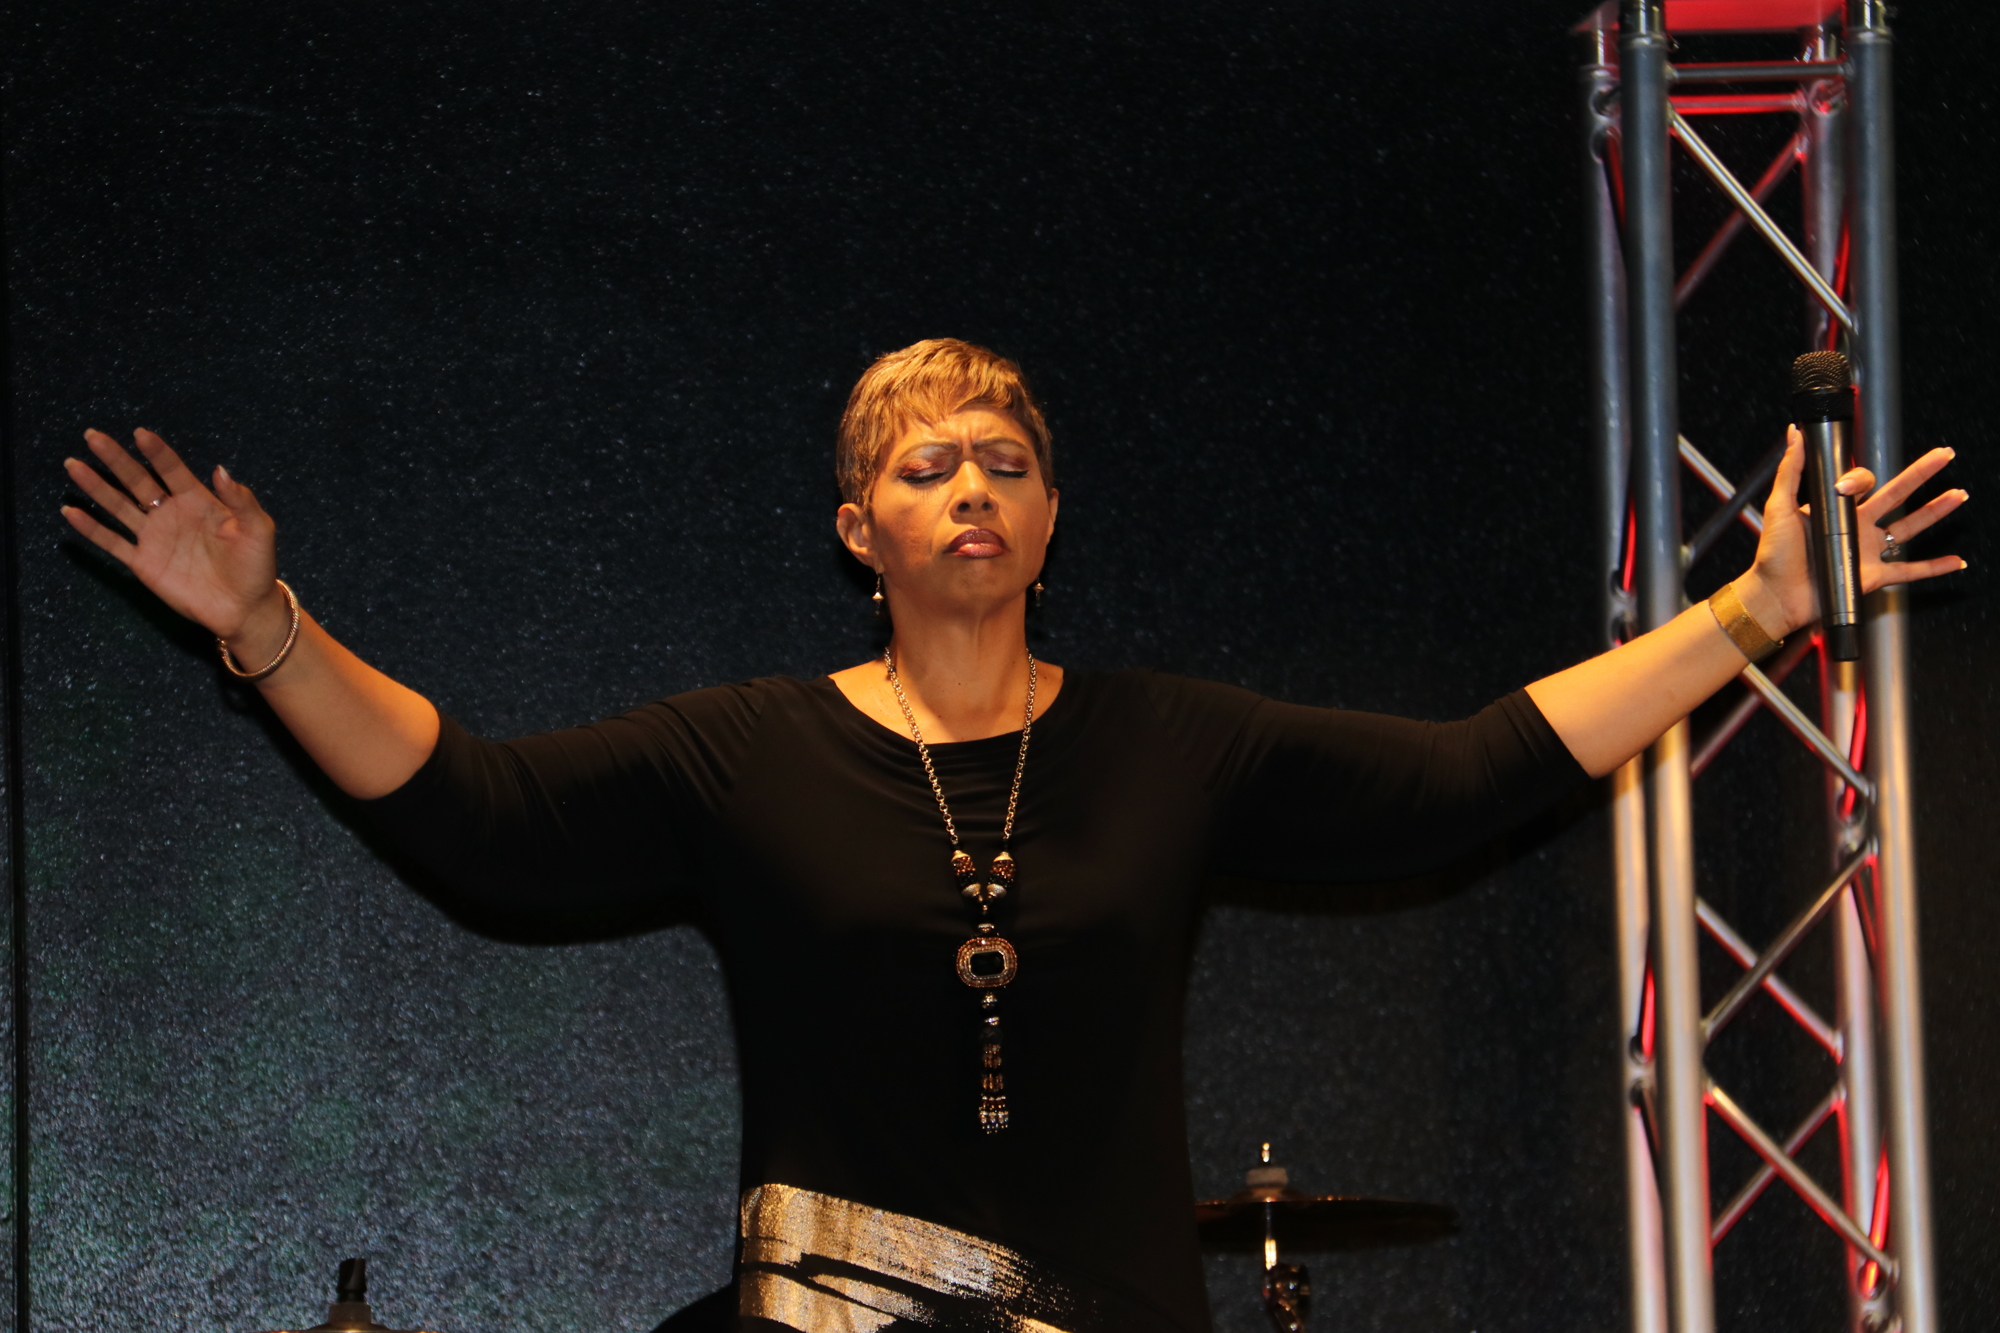 Pastor Teresa Price leads a prayer during a service at Overflow Worship Center.